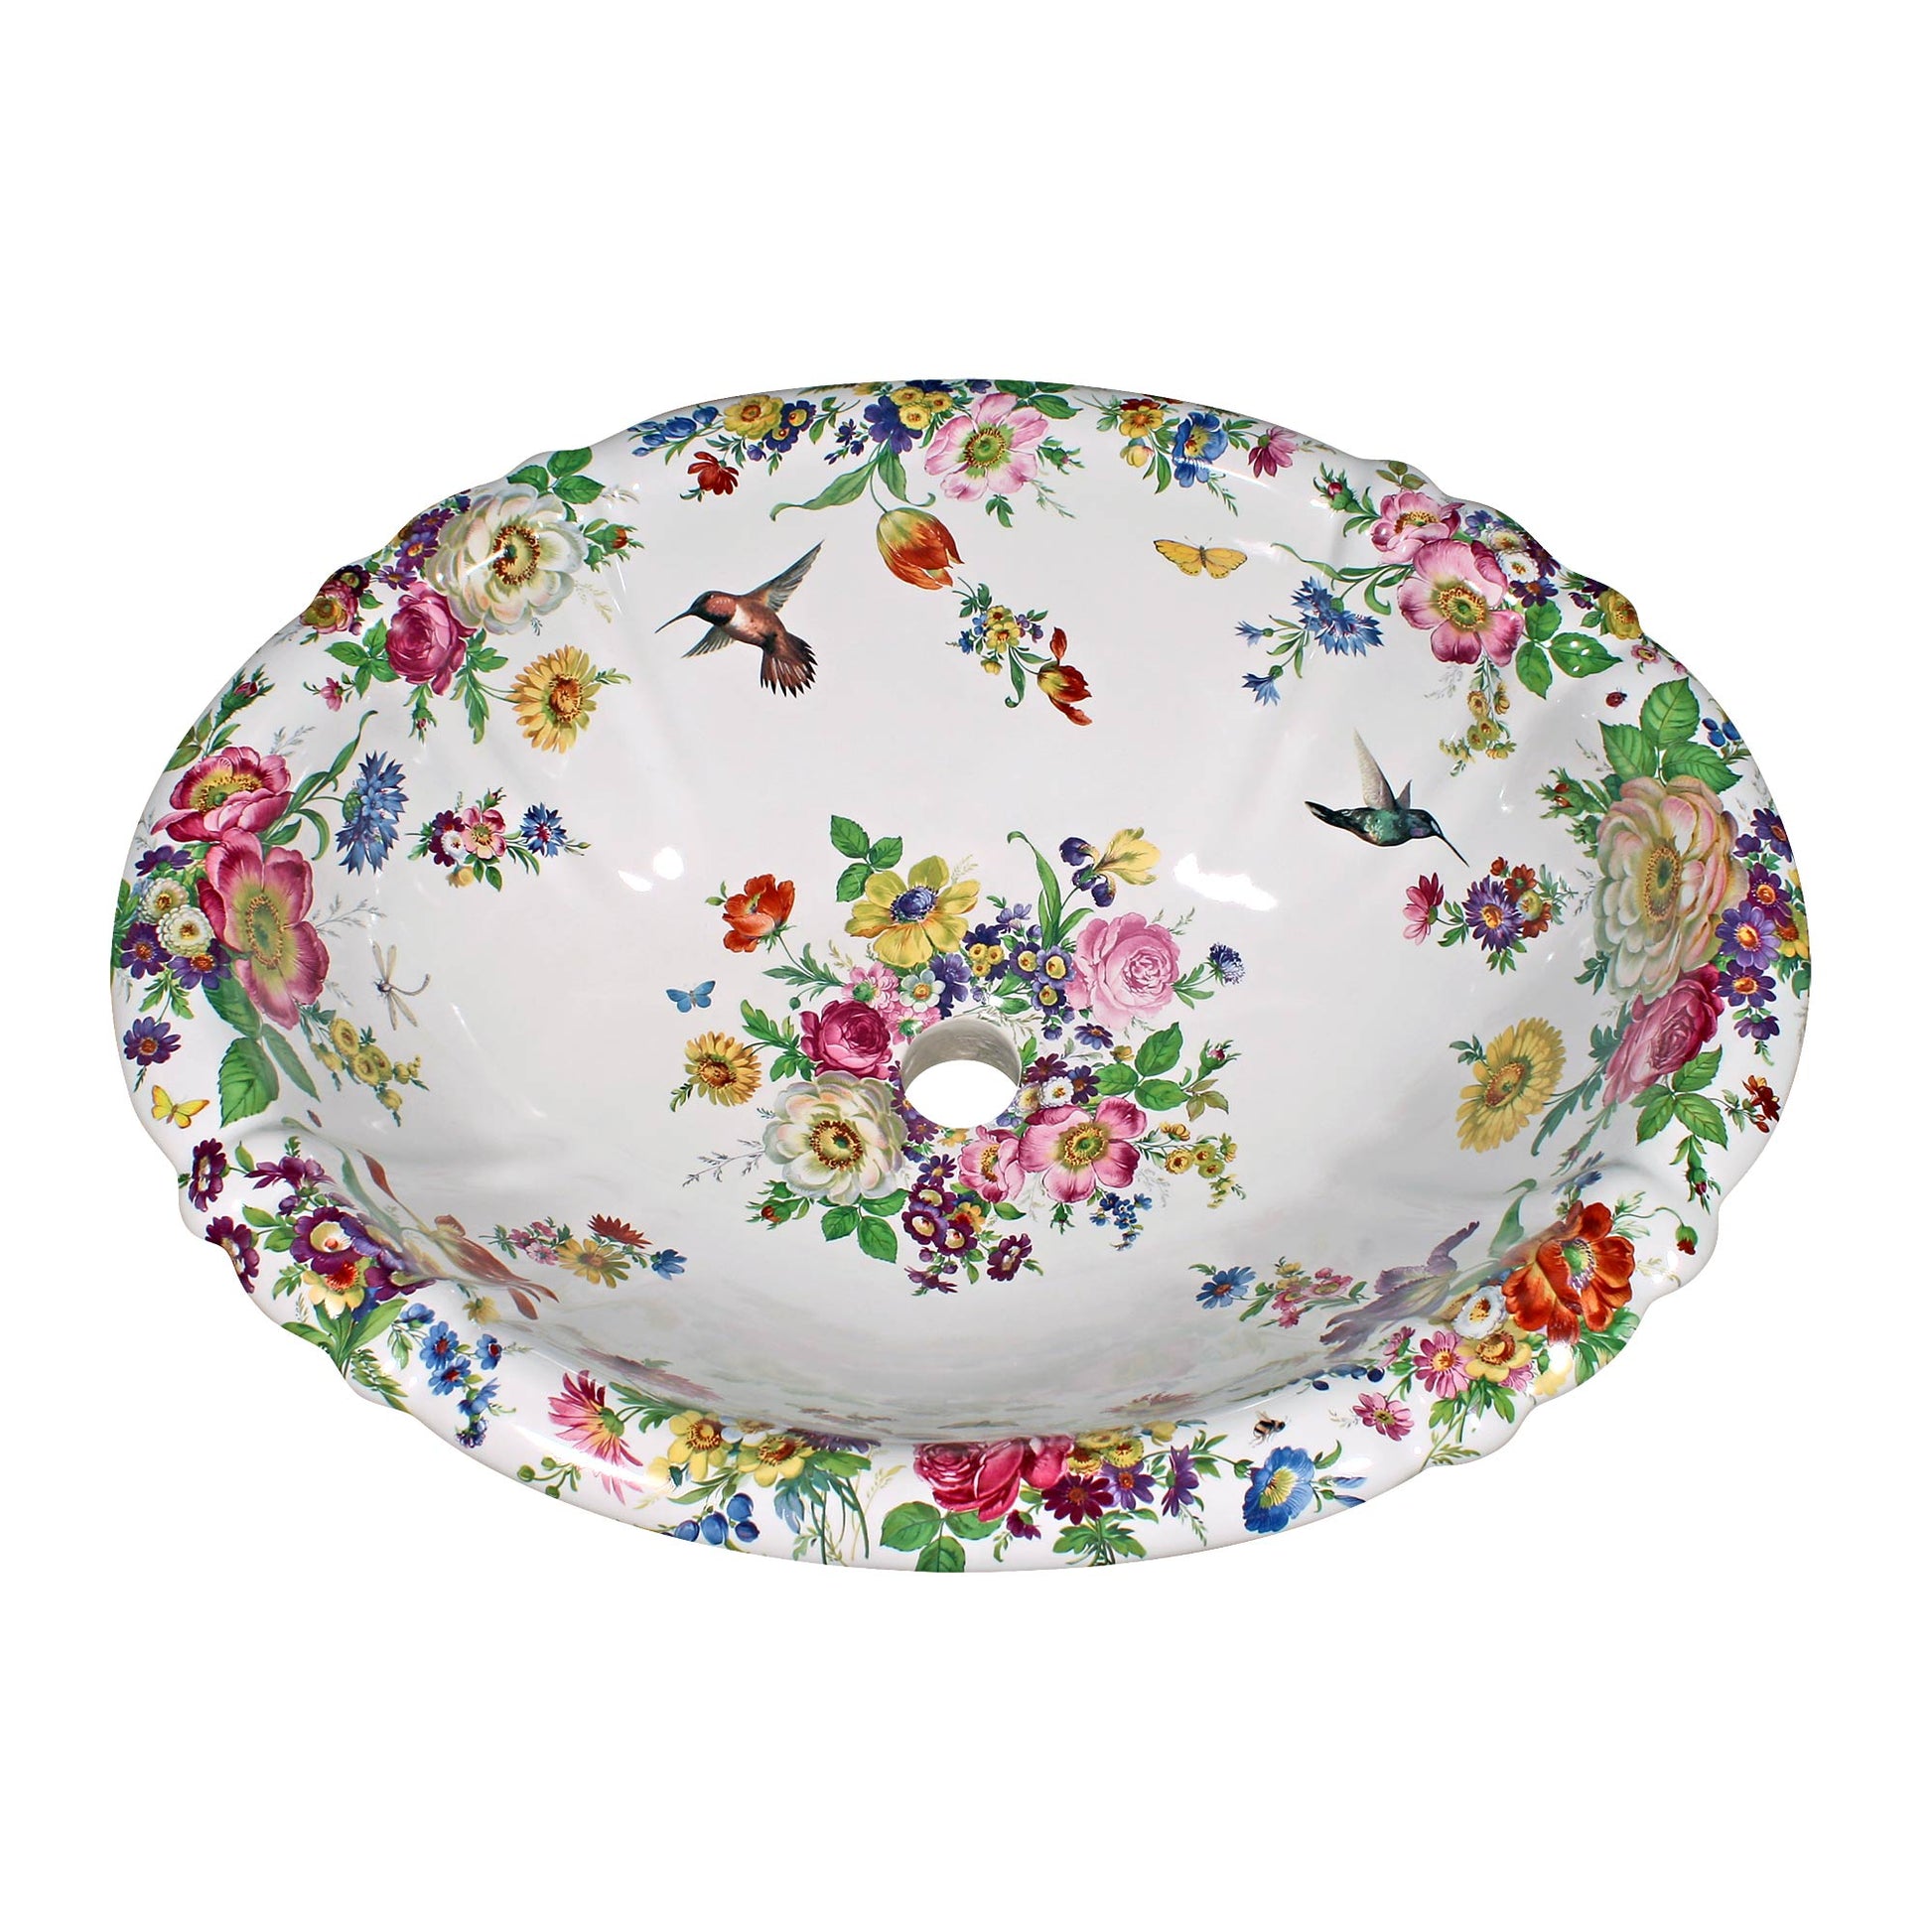 decorative ceramic bathroom sink painted with flowers, roses, hummingbirds and butterflies